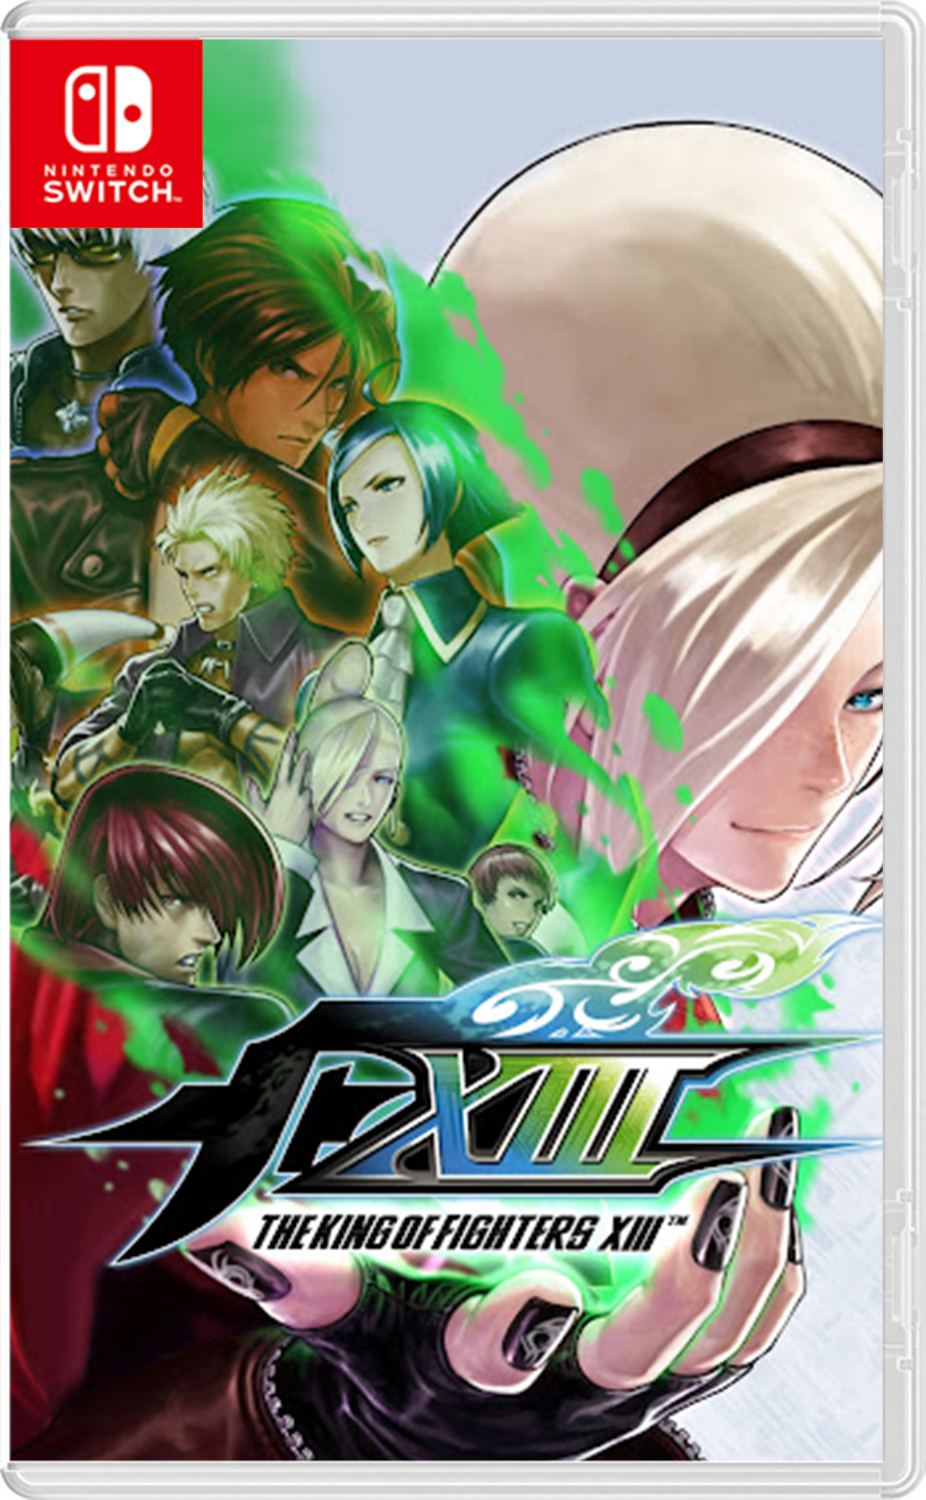 The King of Fighters XII